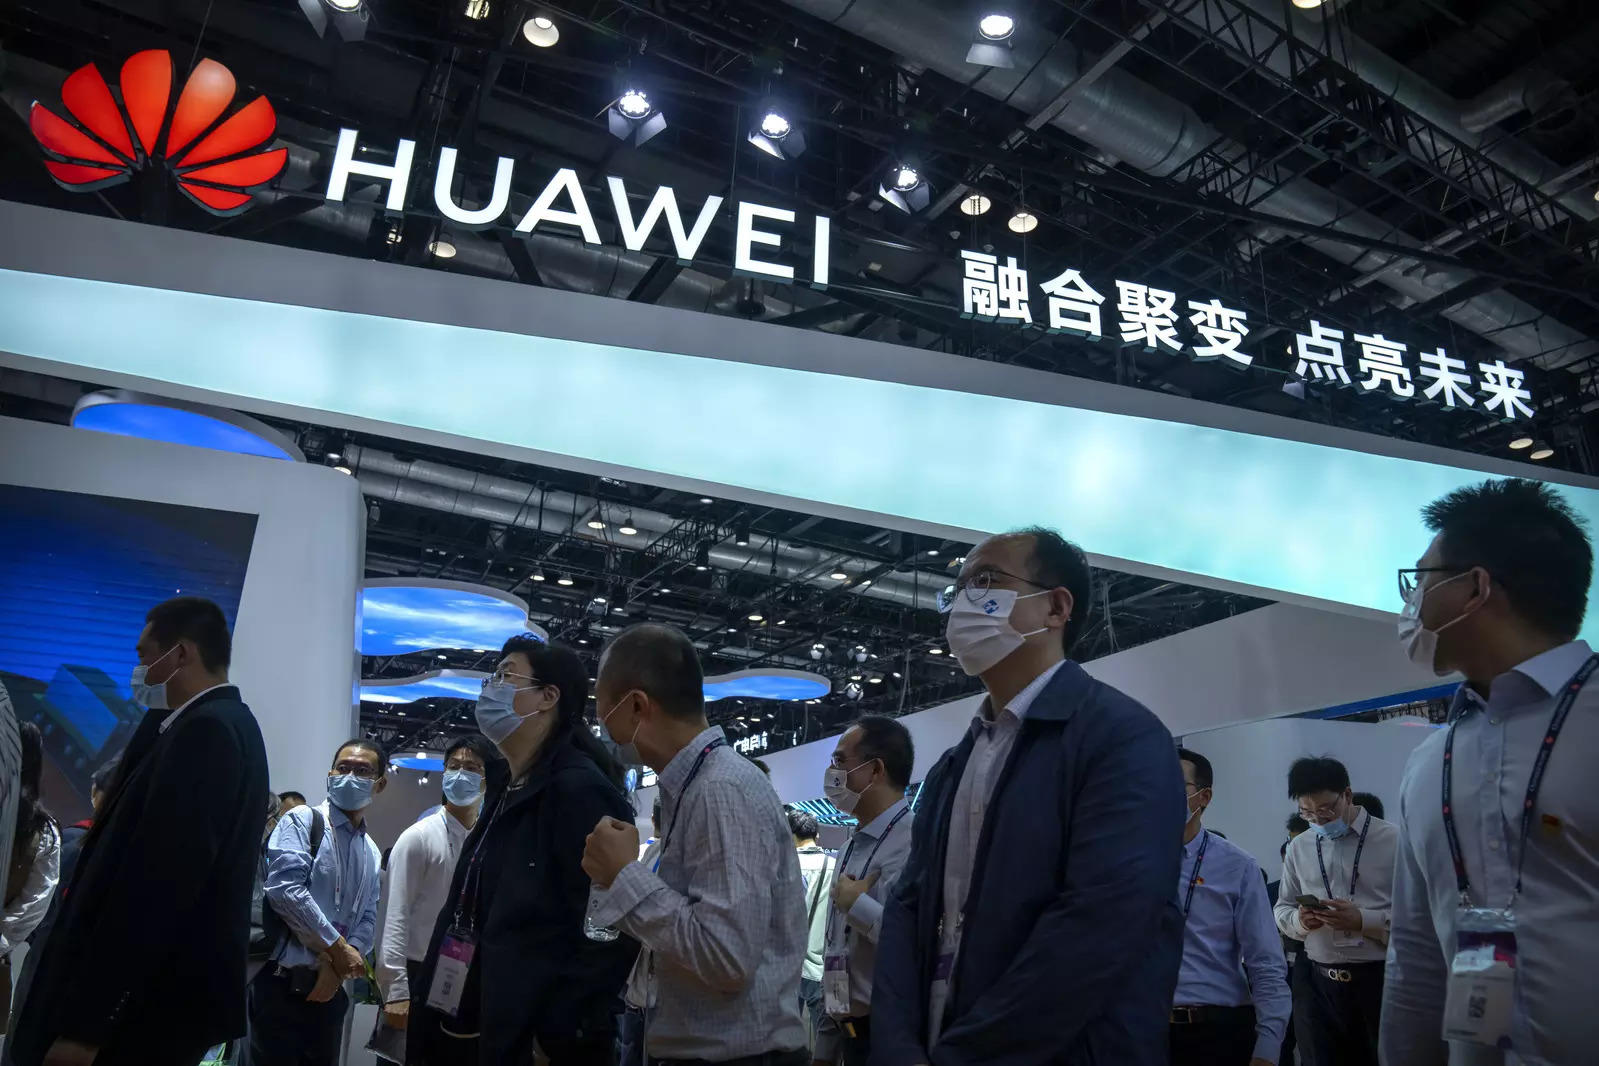 U.S. lawmakers introduce bill to restrict Huawei's access to banks